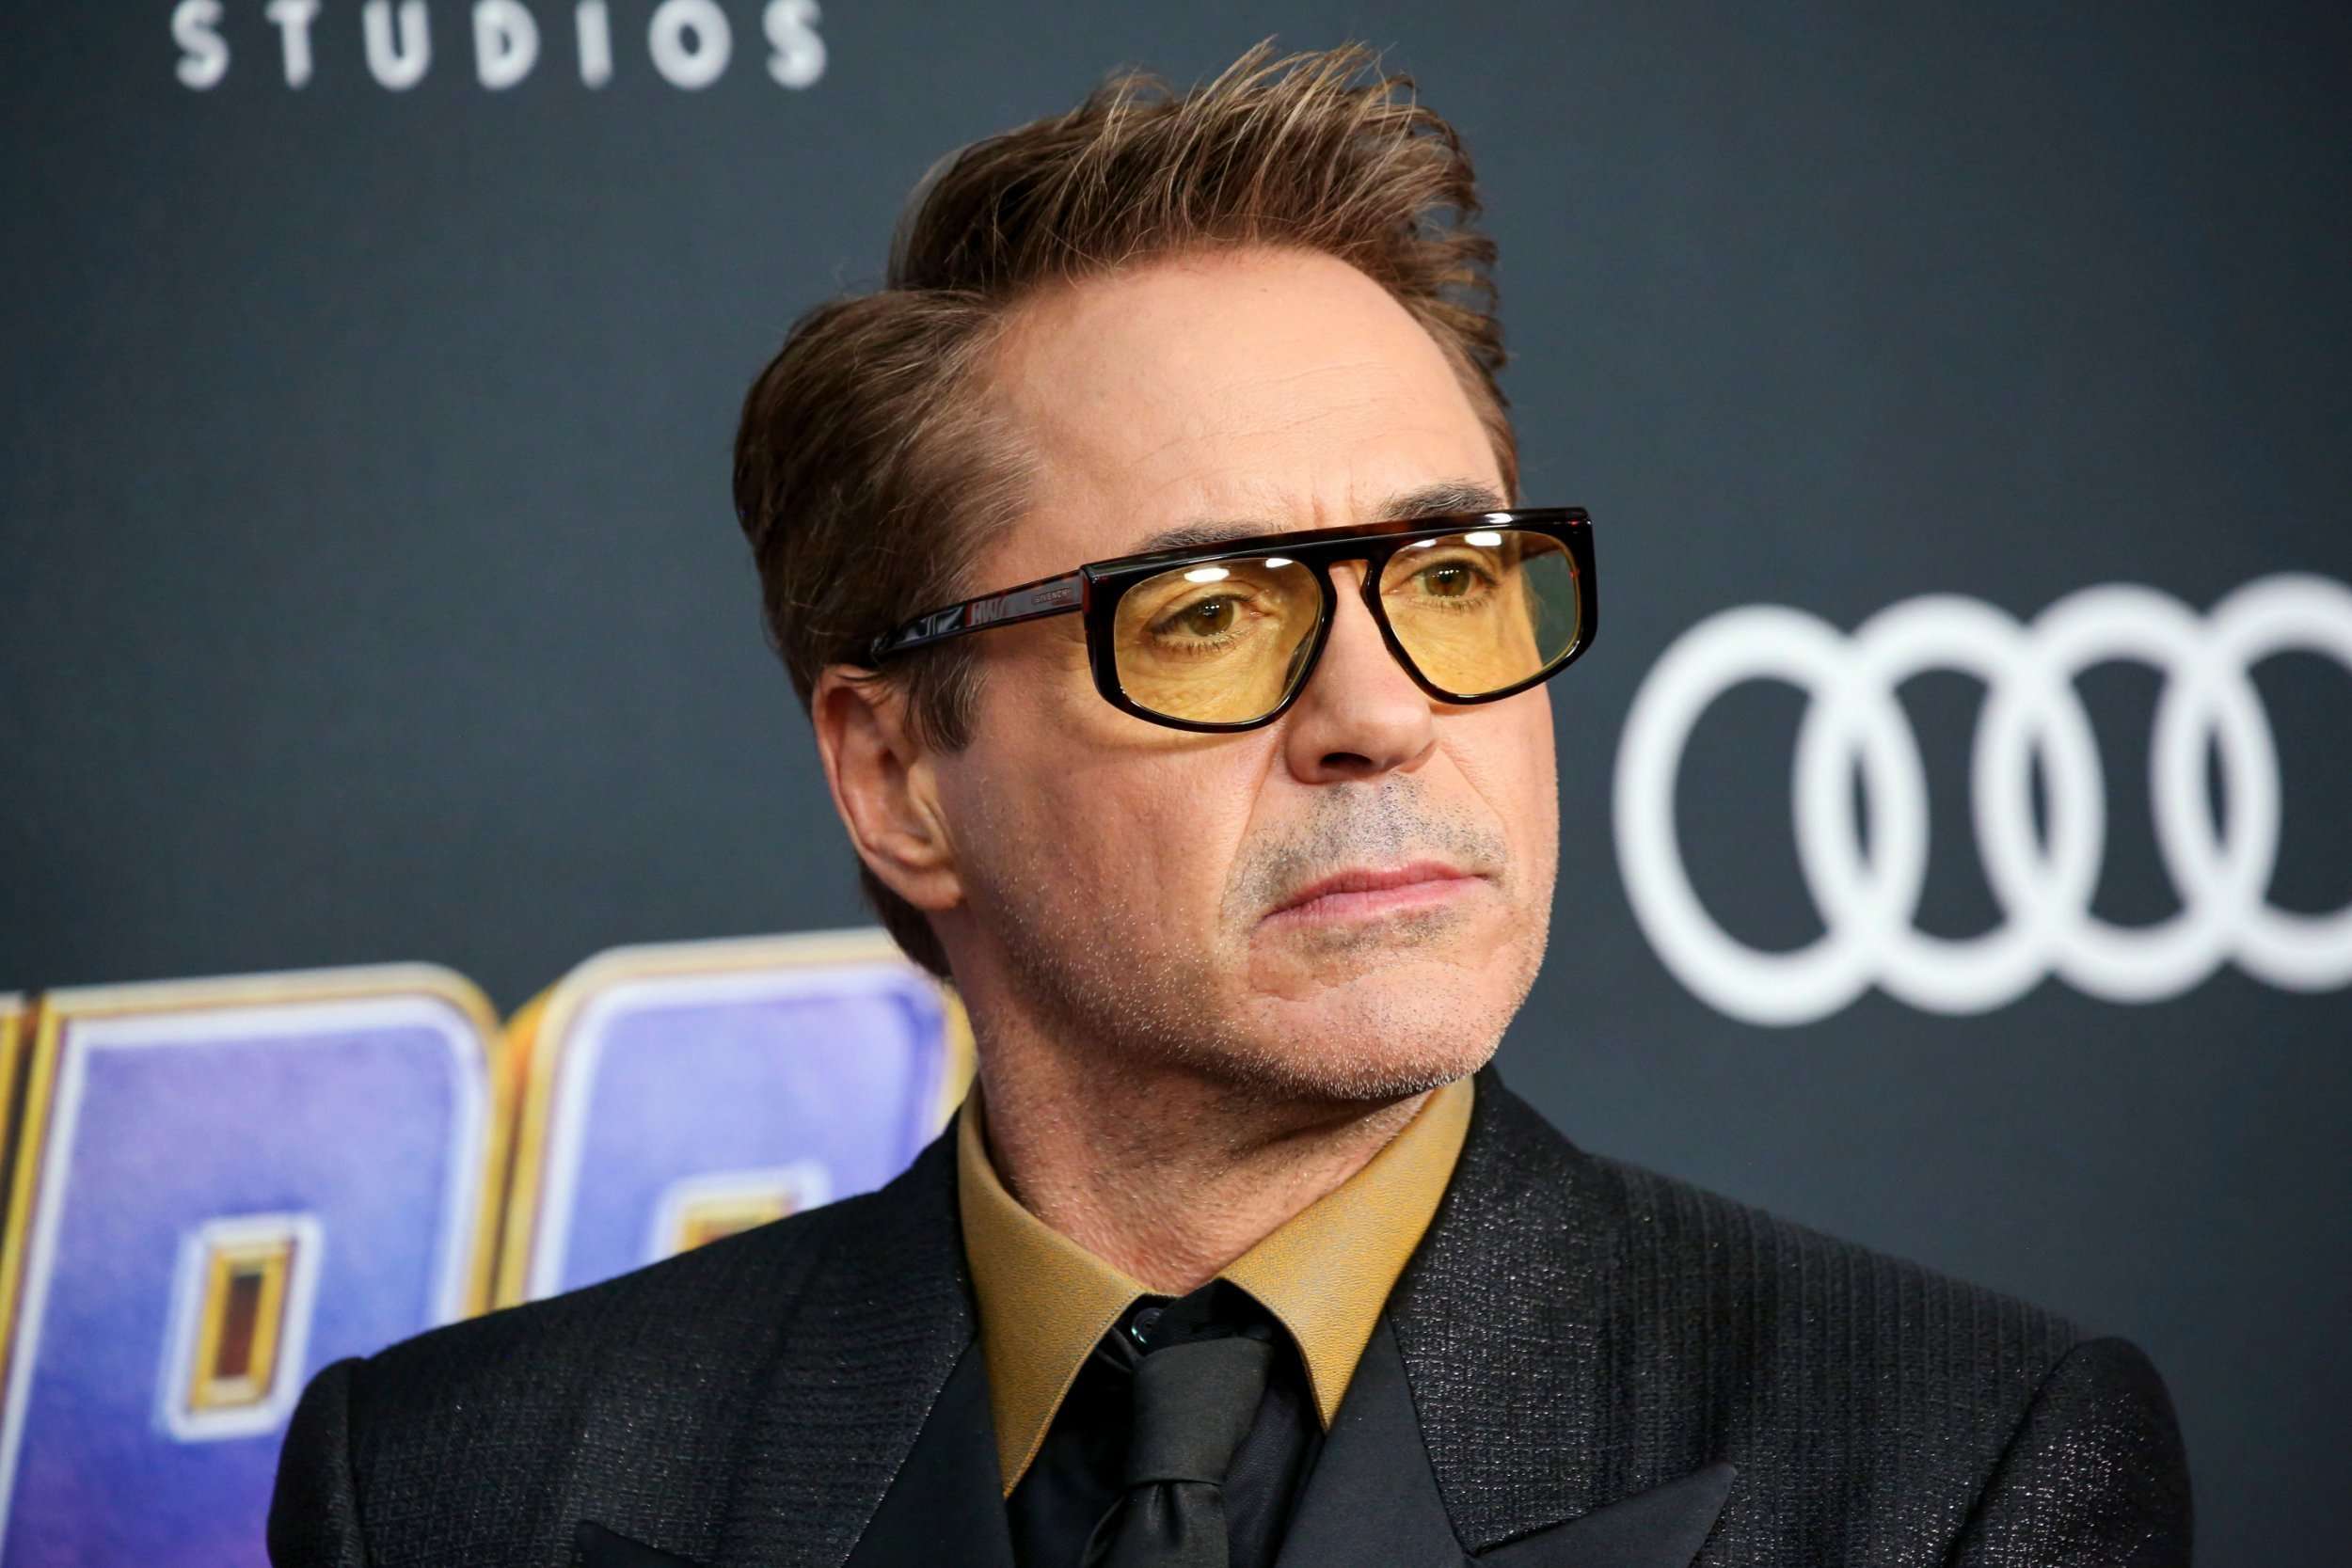 robert-downey-jr-having-a-crisis-about-the-environment-and-pledges-to-clean-it-up-with-robots.jpg